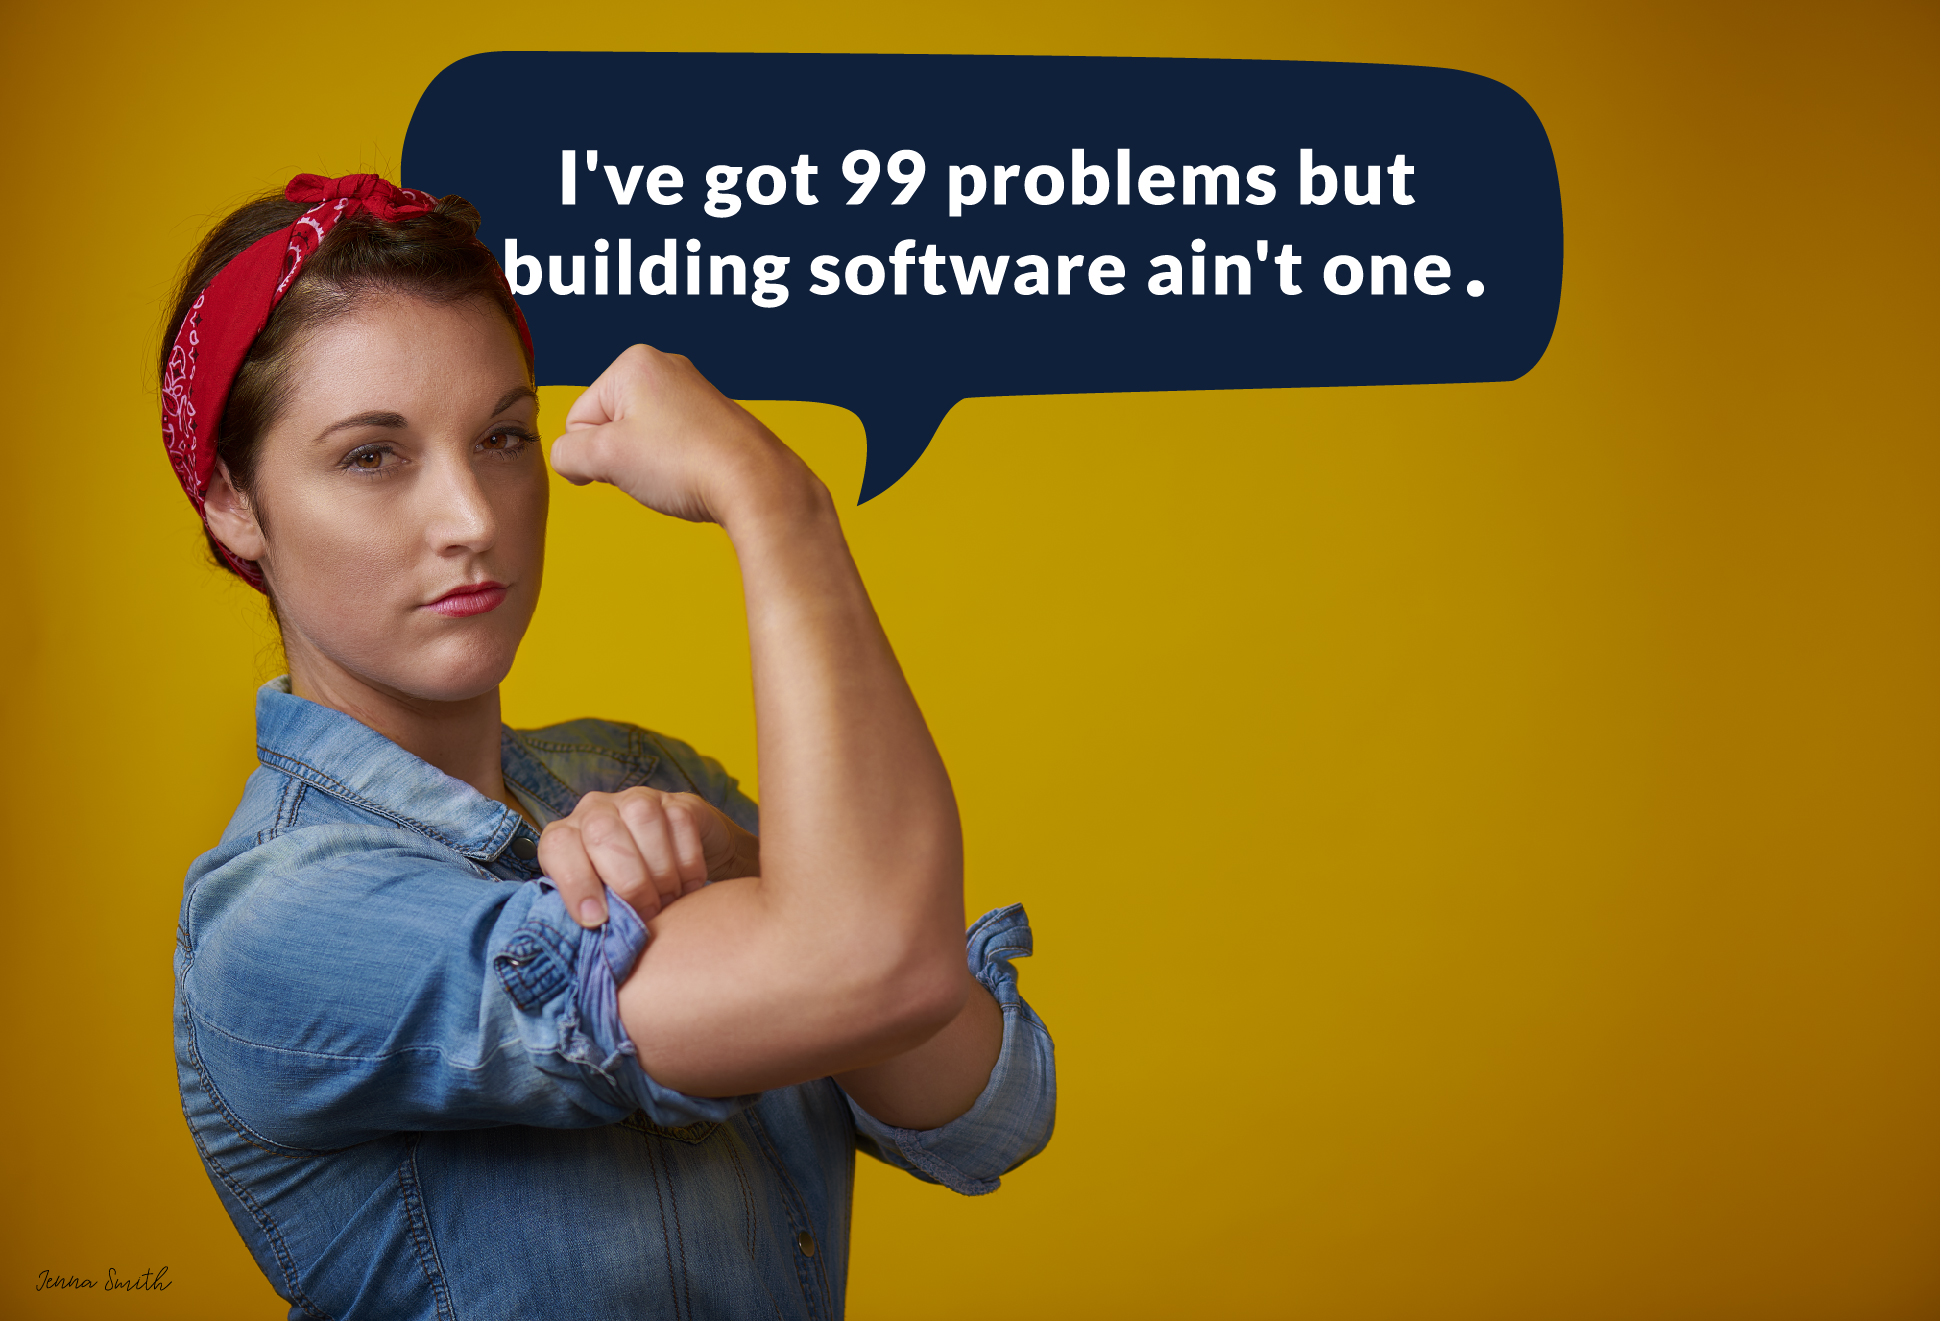 I've got 99 problems but building software ain't one.